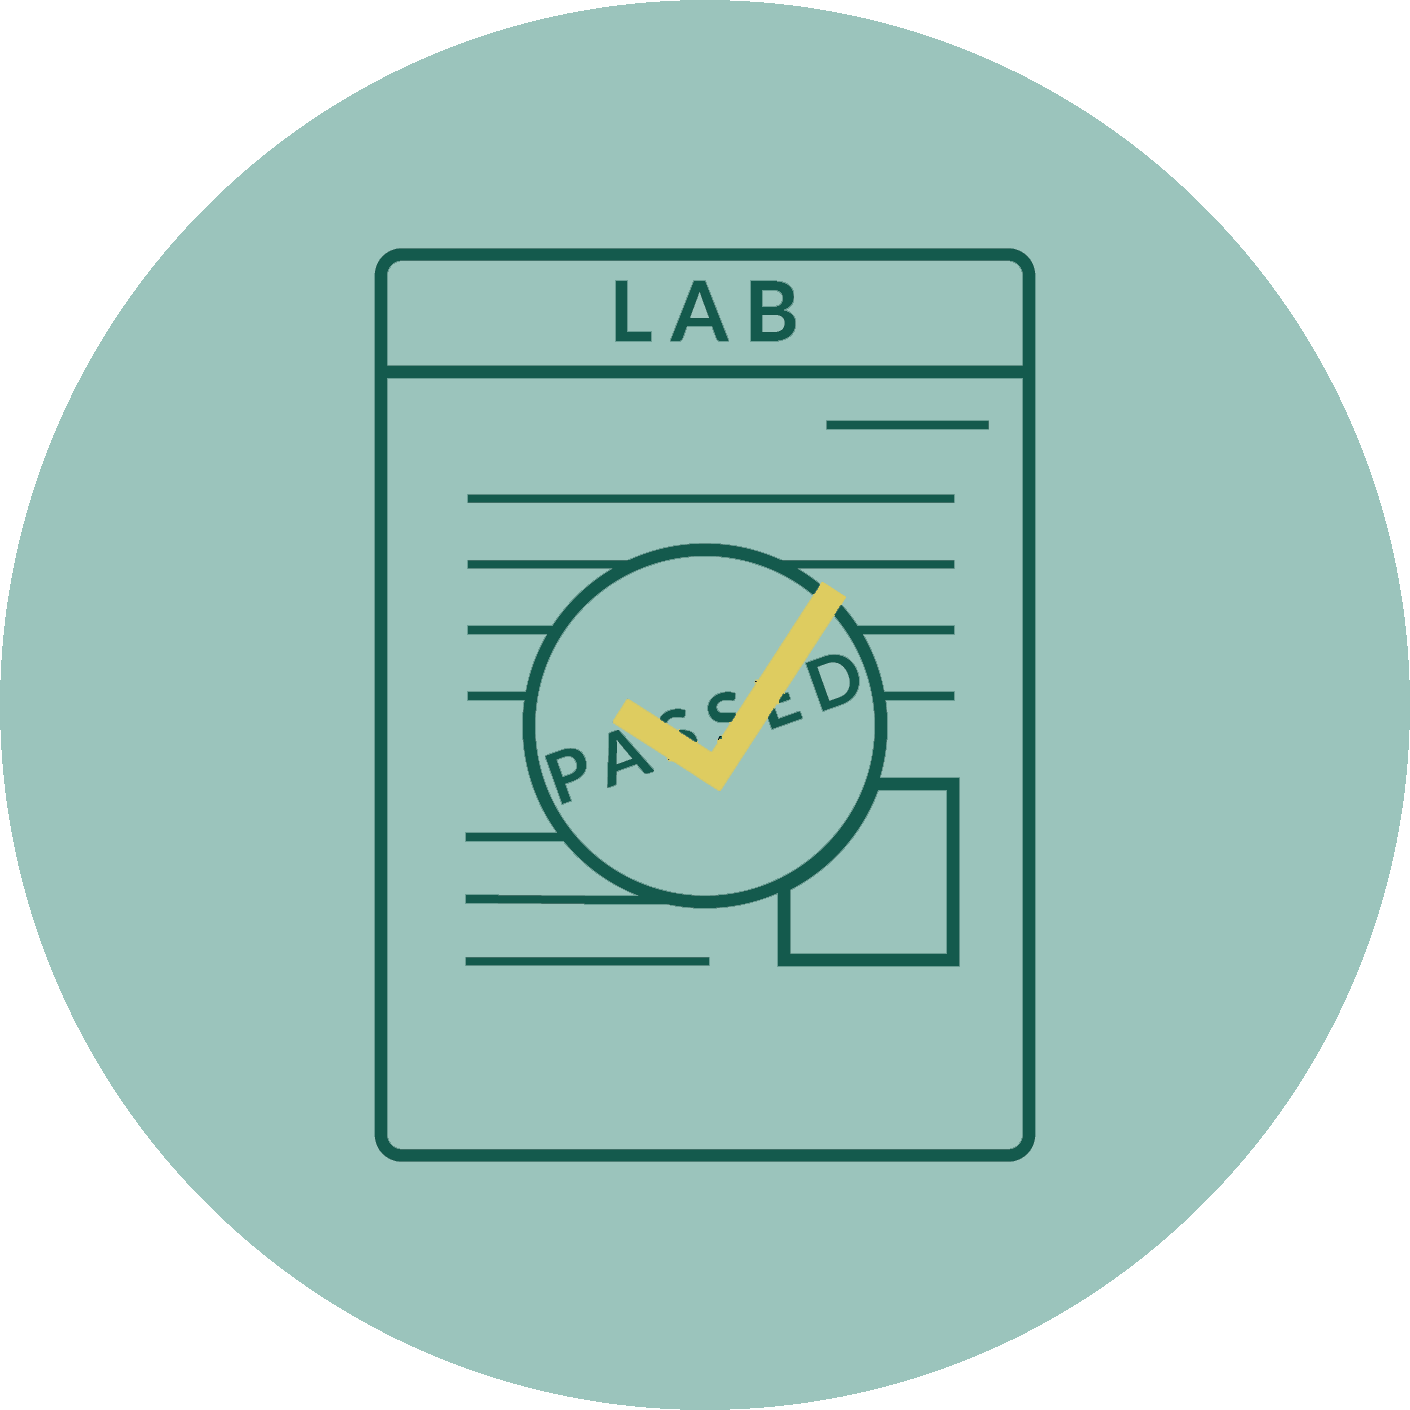 Third-party lab tested logo with a beaker icon